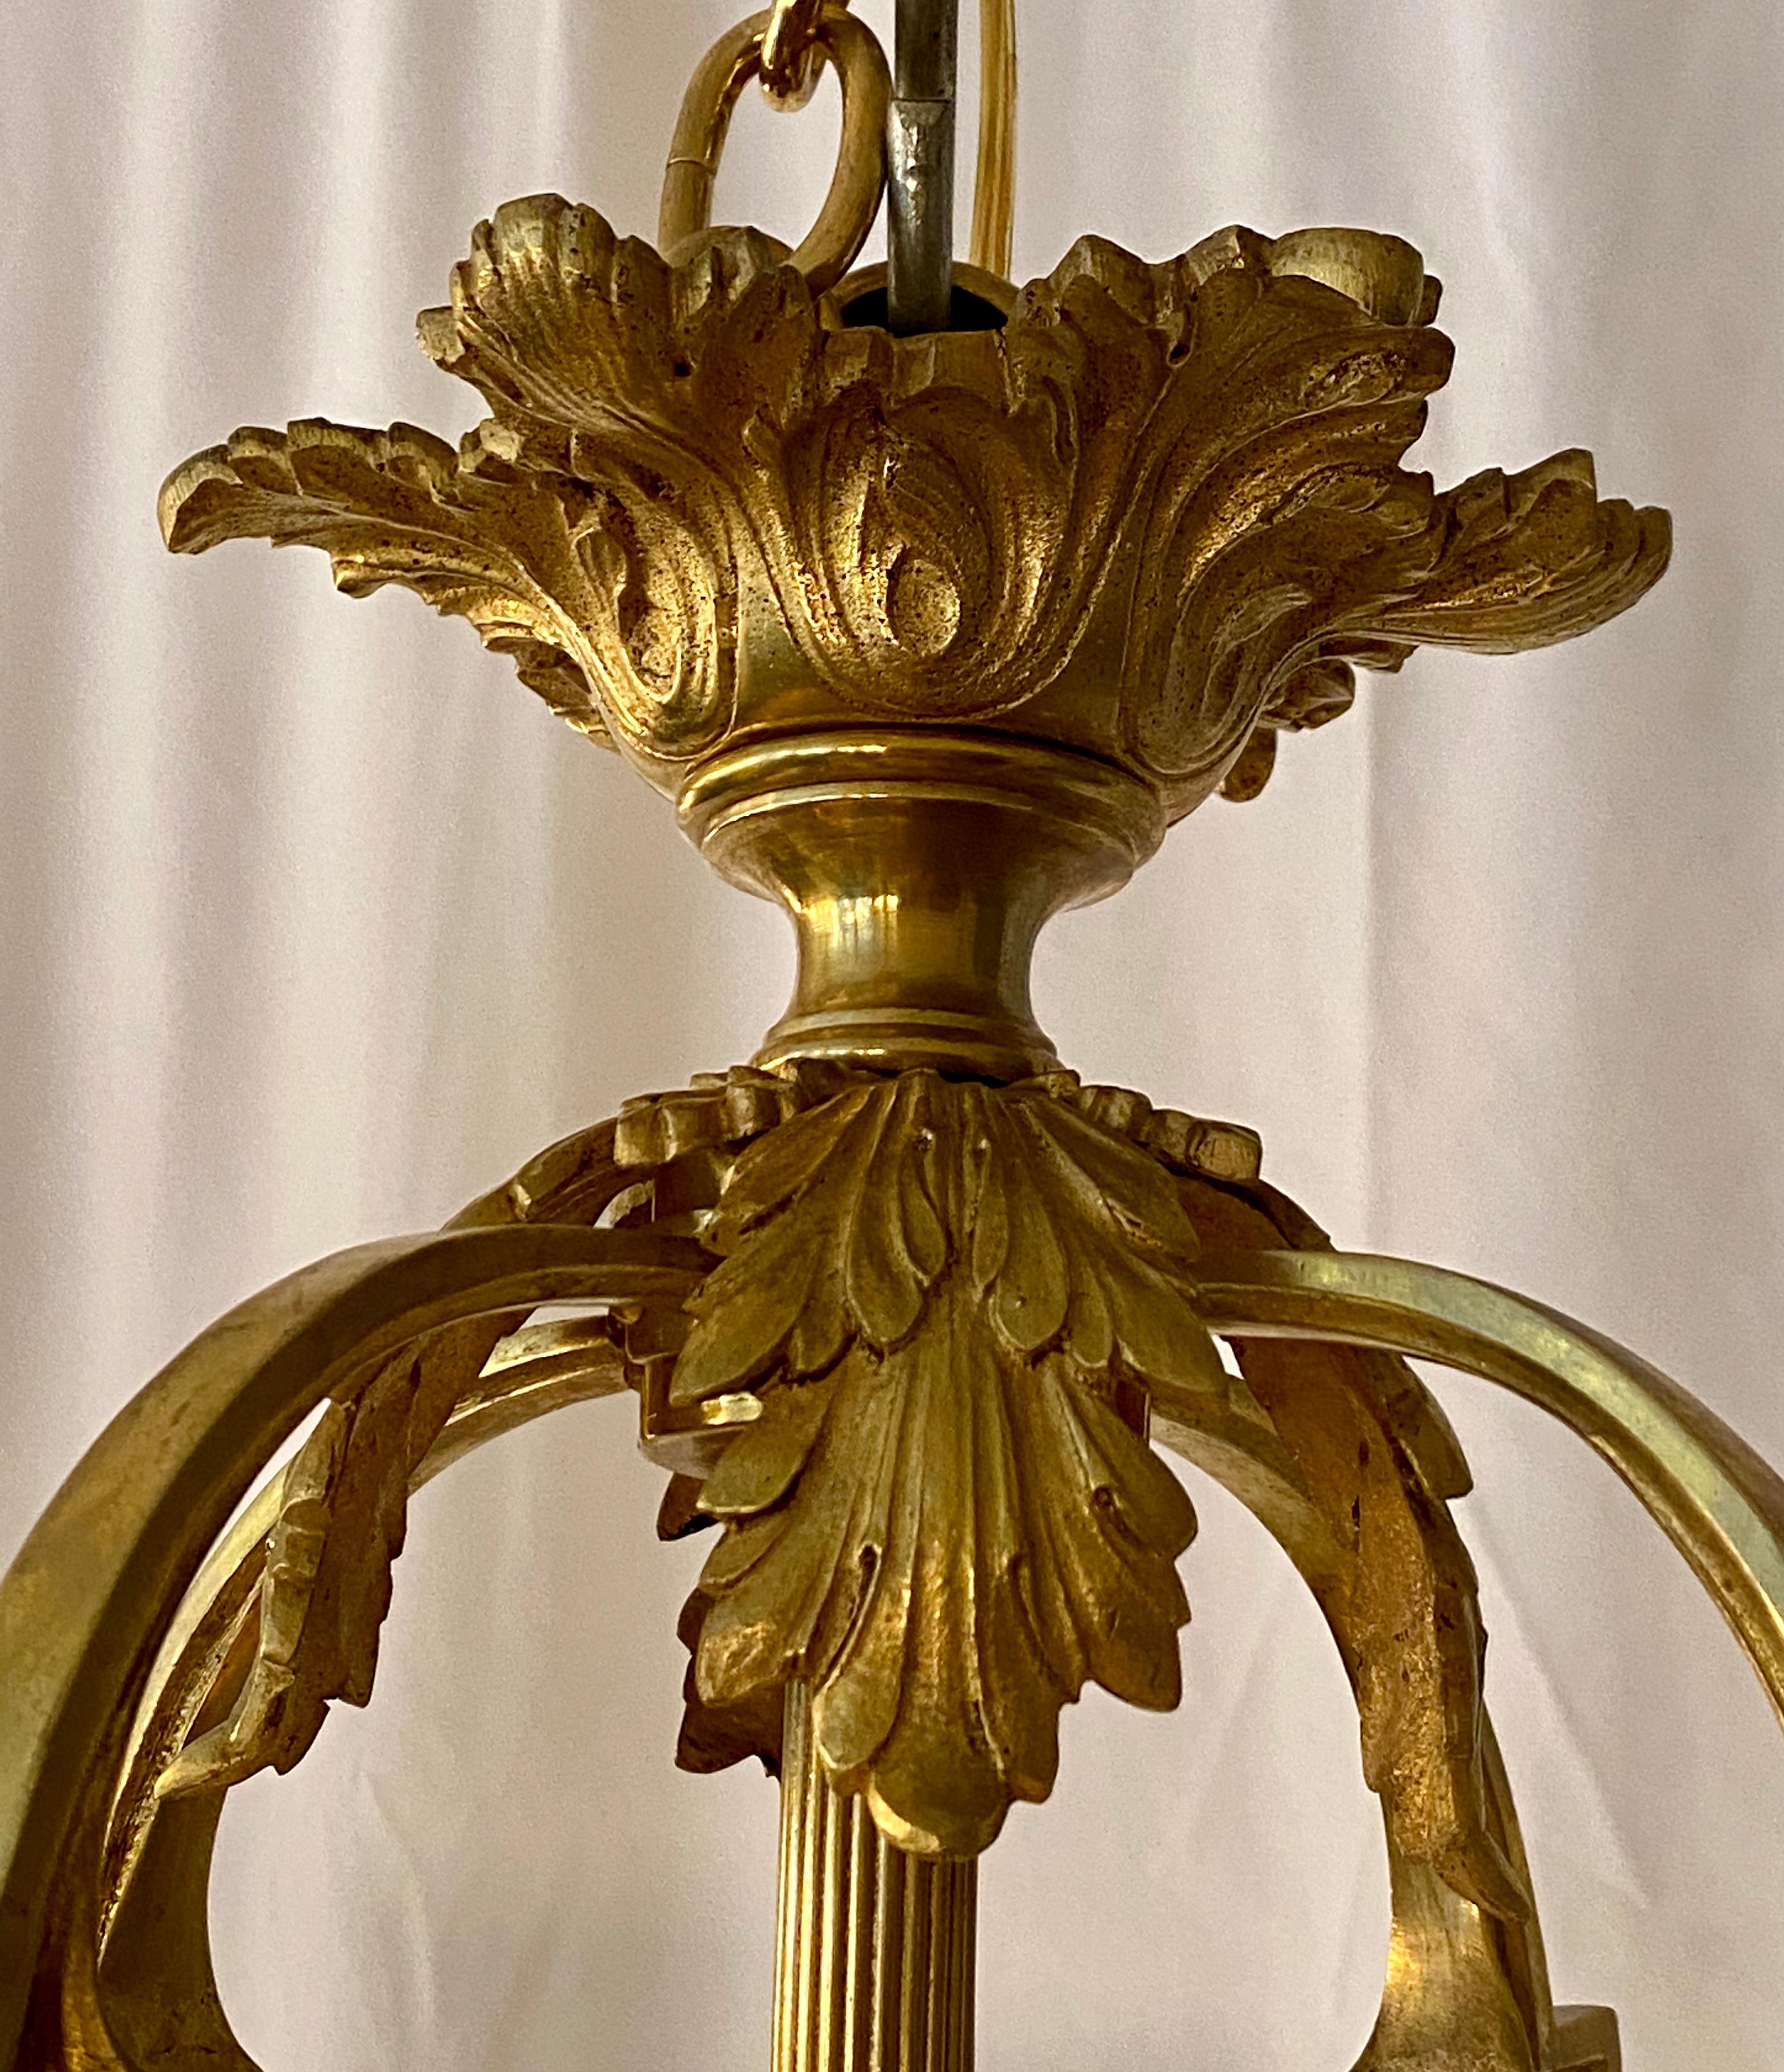 20th Century Antique Gold Bronze Hall Lantern with Finely Cut and Etched Glass, circa 1900